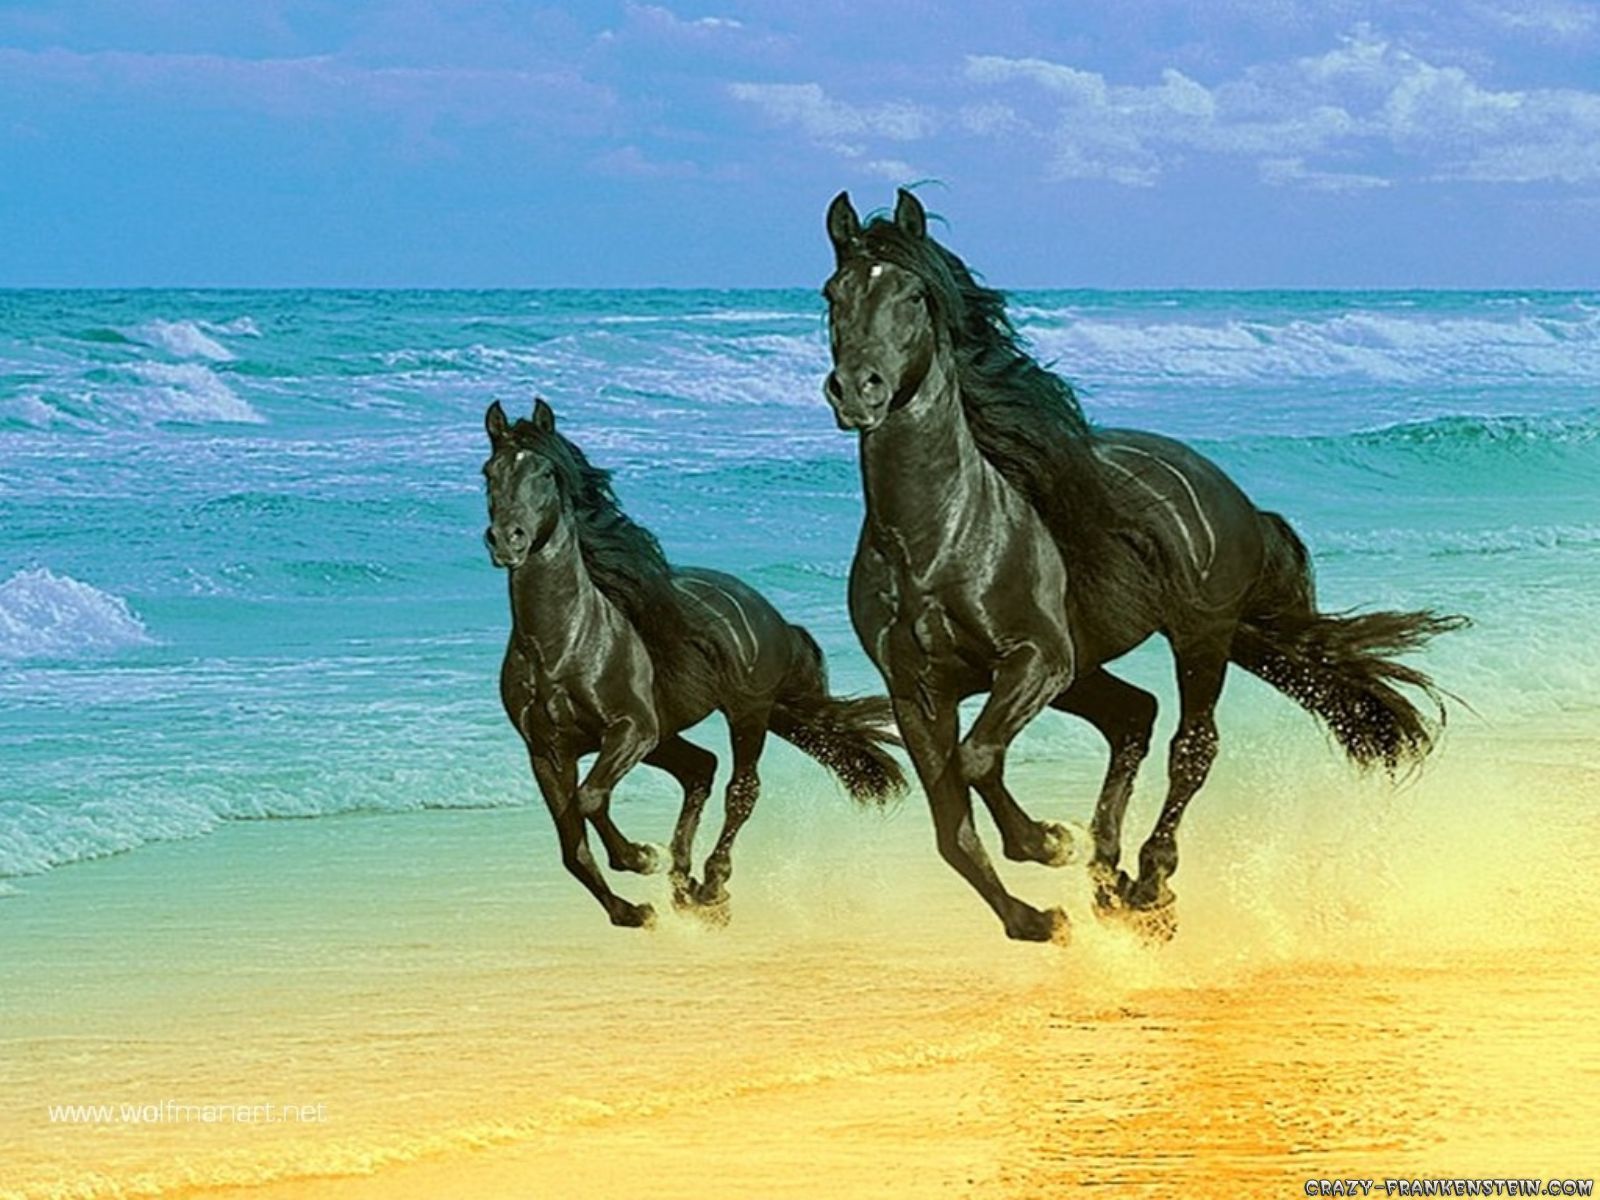 Top Riding A Horse Wallpapers Images for Pinterest